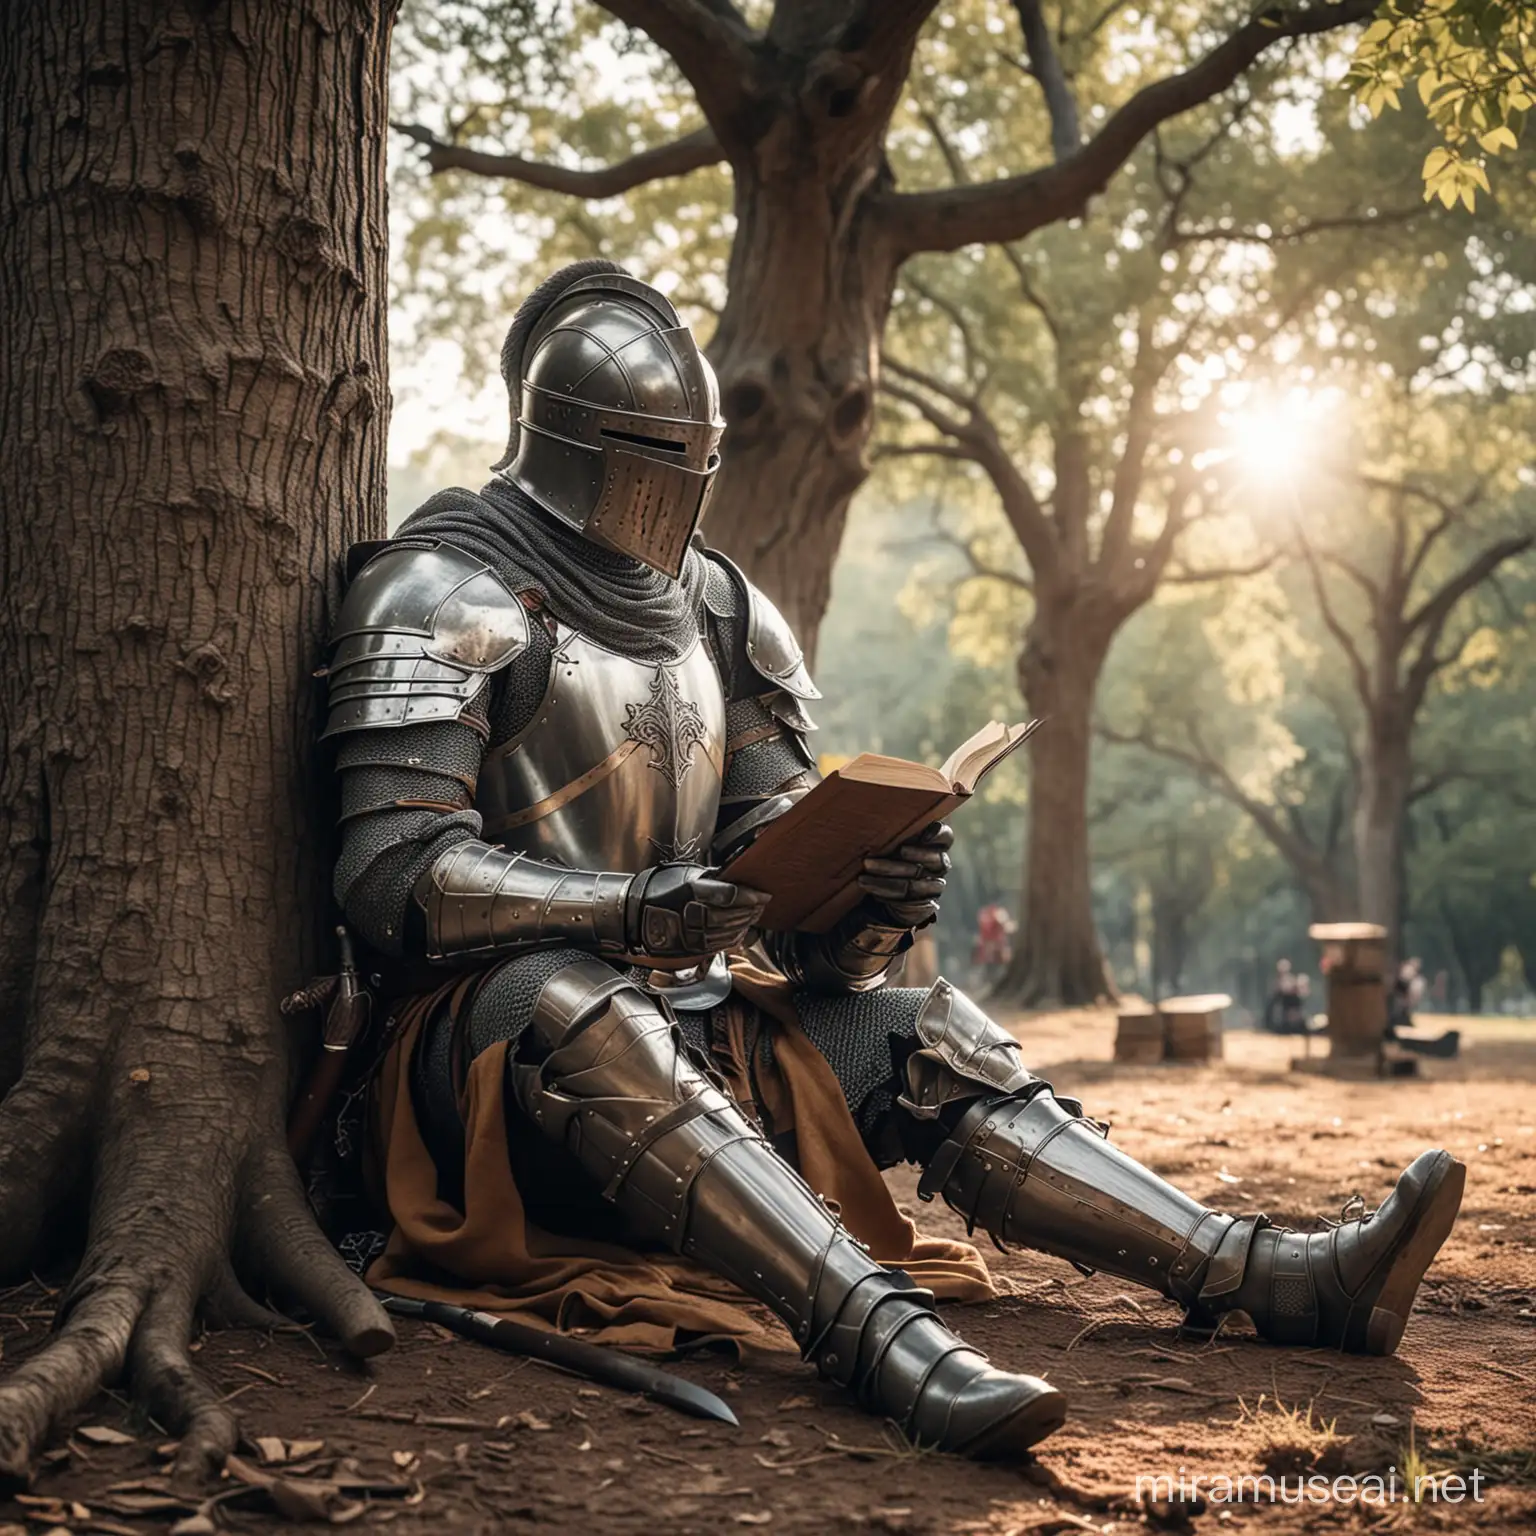 Knight Reading Book Under Tree with Resting Sword